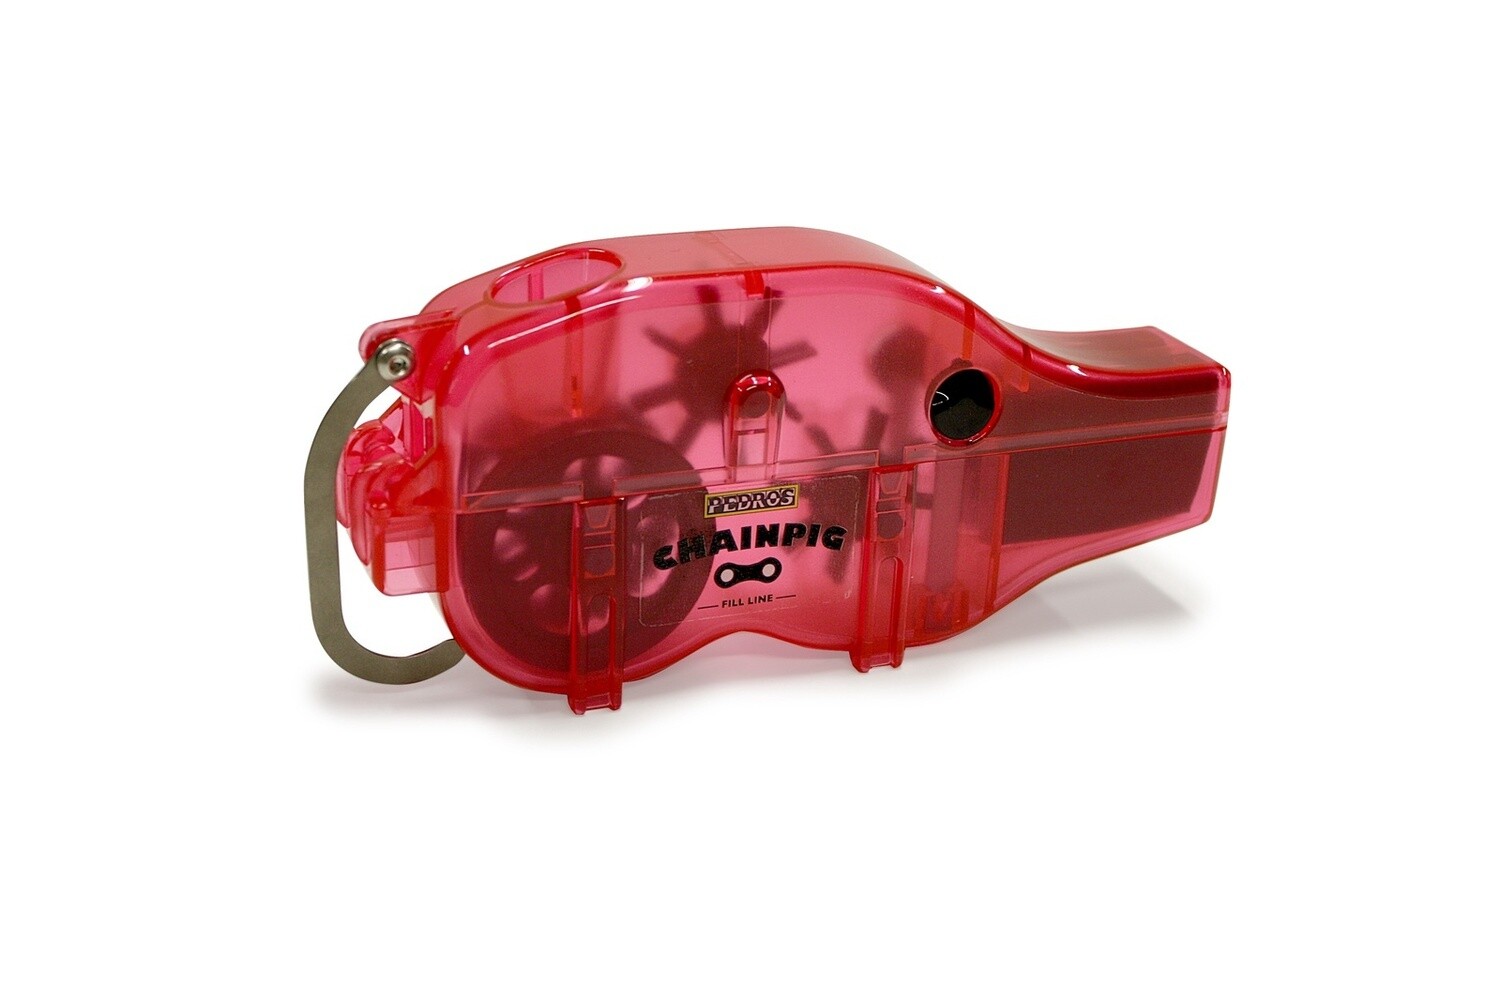 Pedro&#39;s Chain Pig II - Hands-Free Chain Cleaner